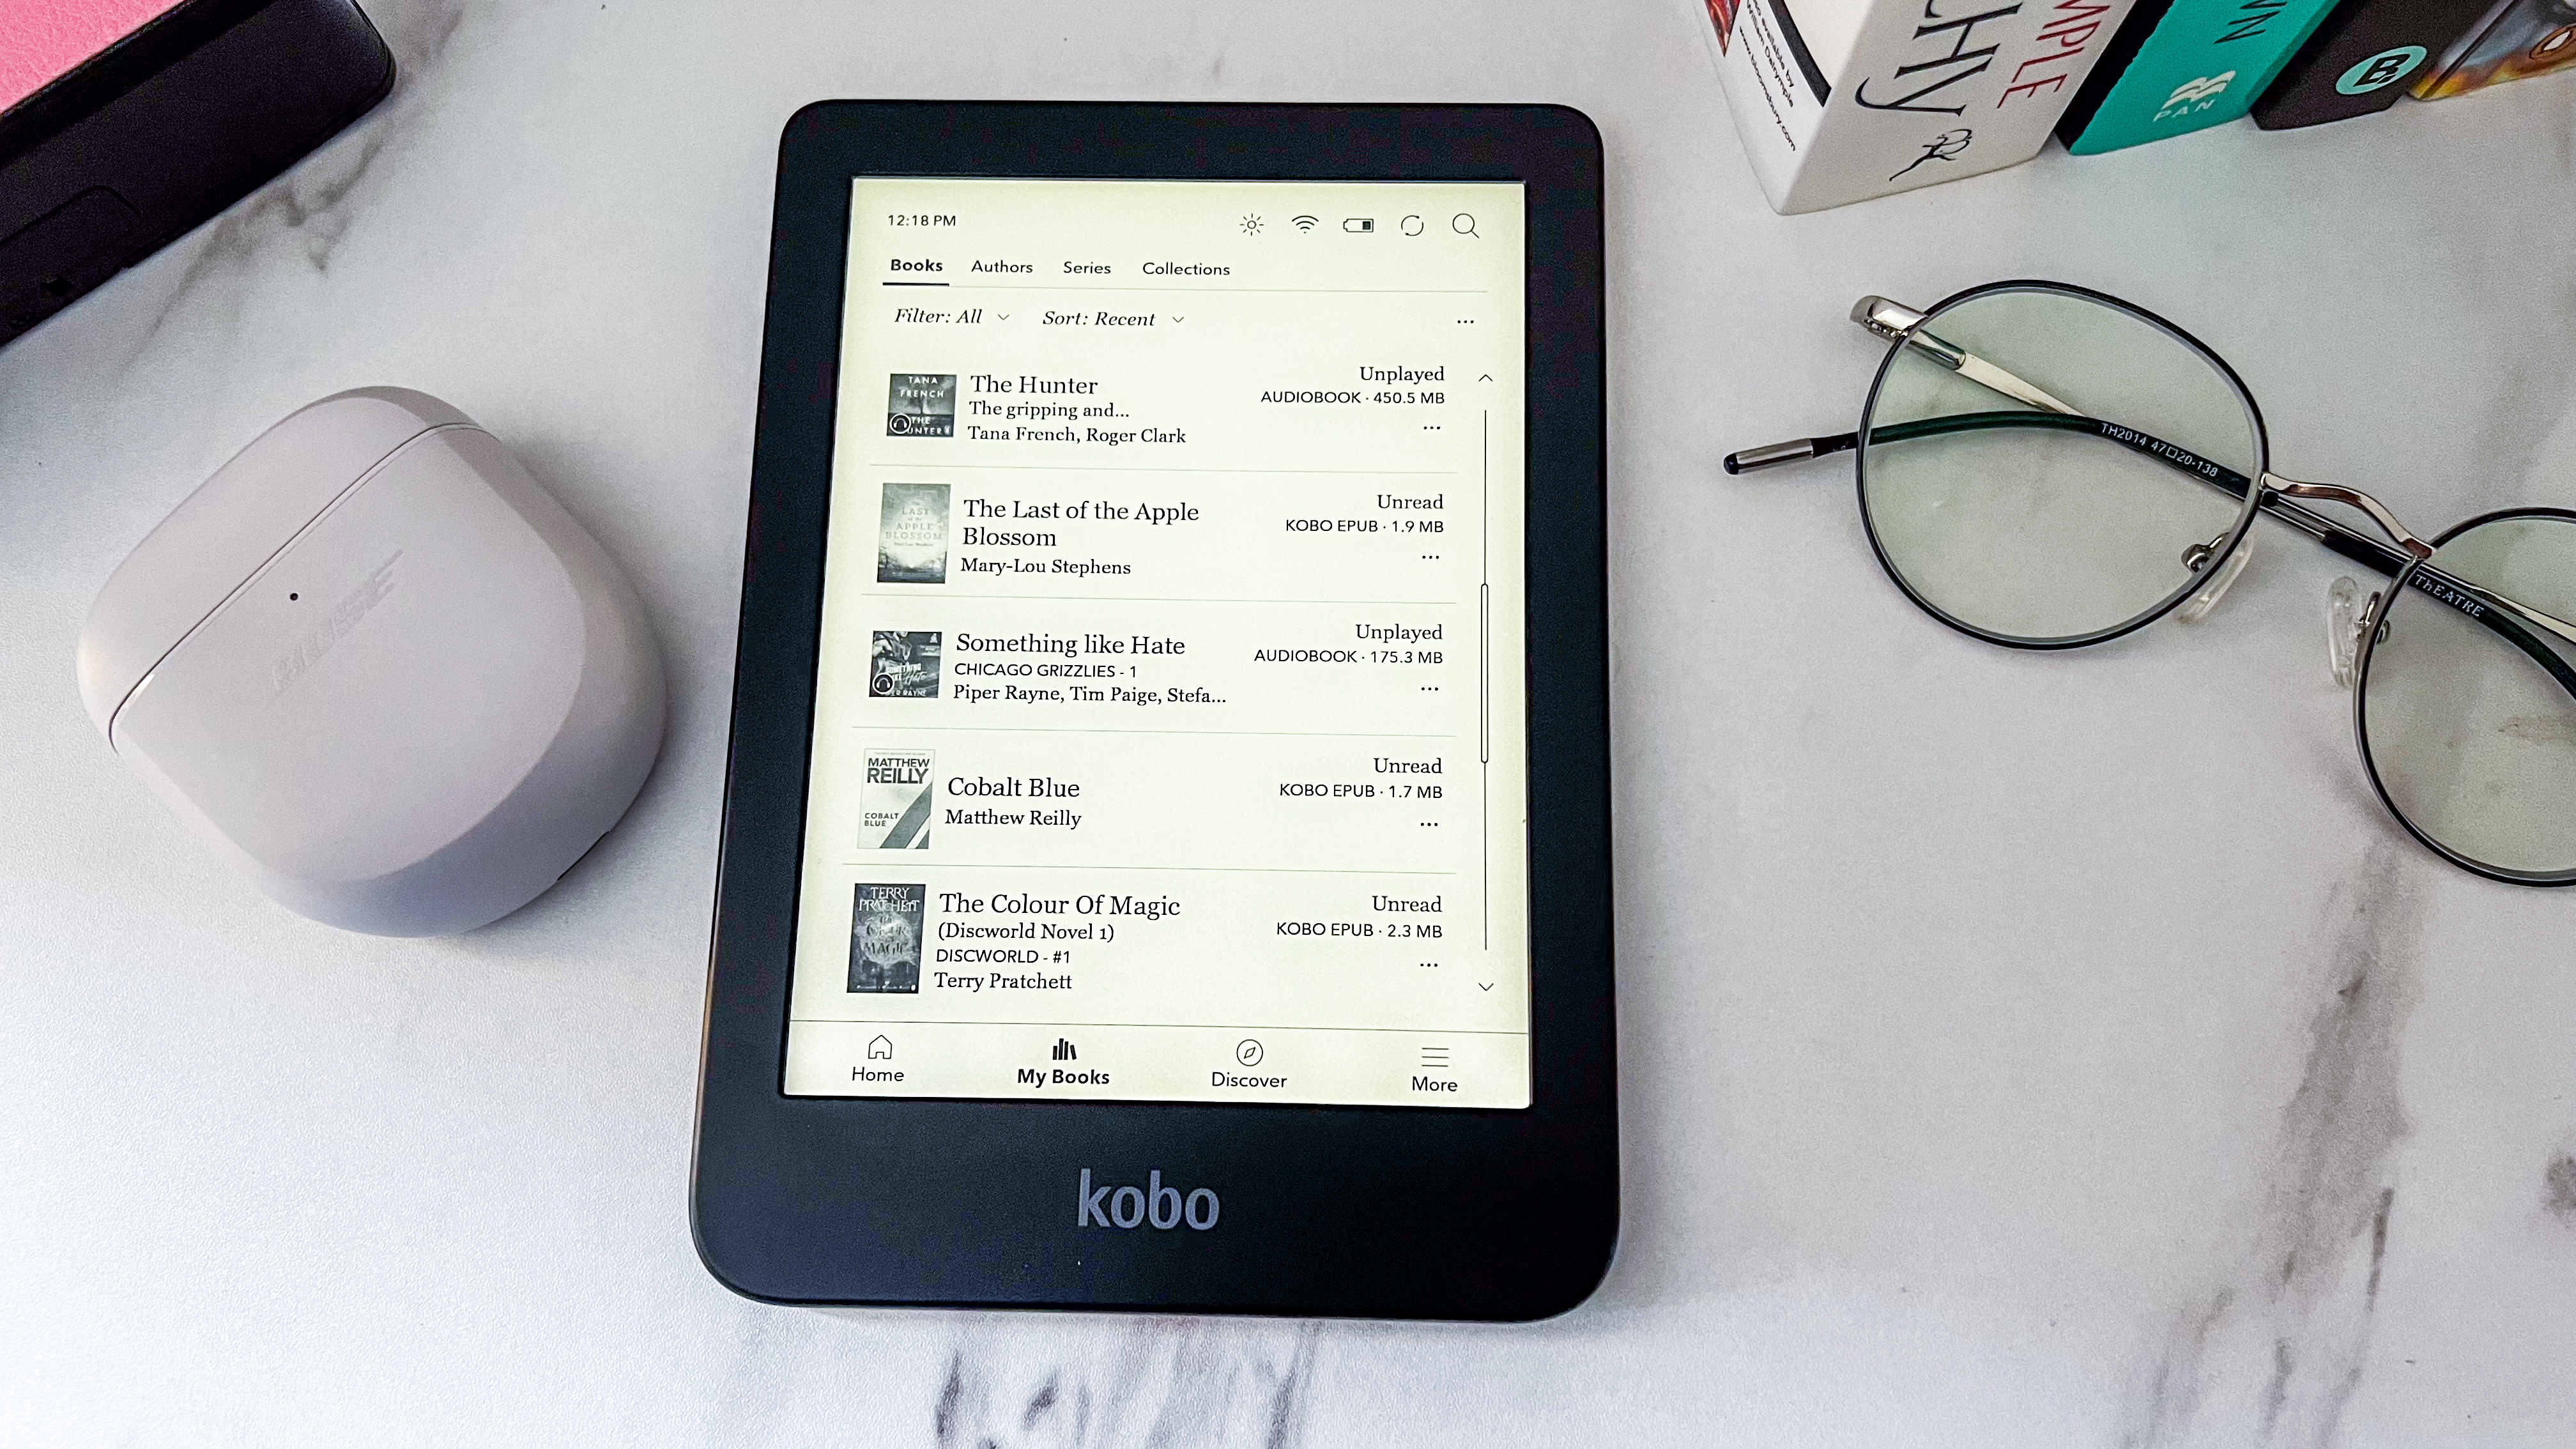 The My Books tab on the Kobo Clara BW displaying a library of ebooks and audiobooks